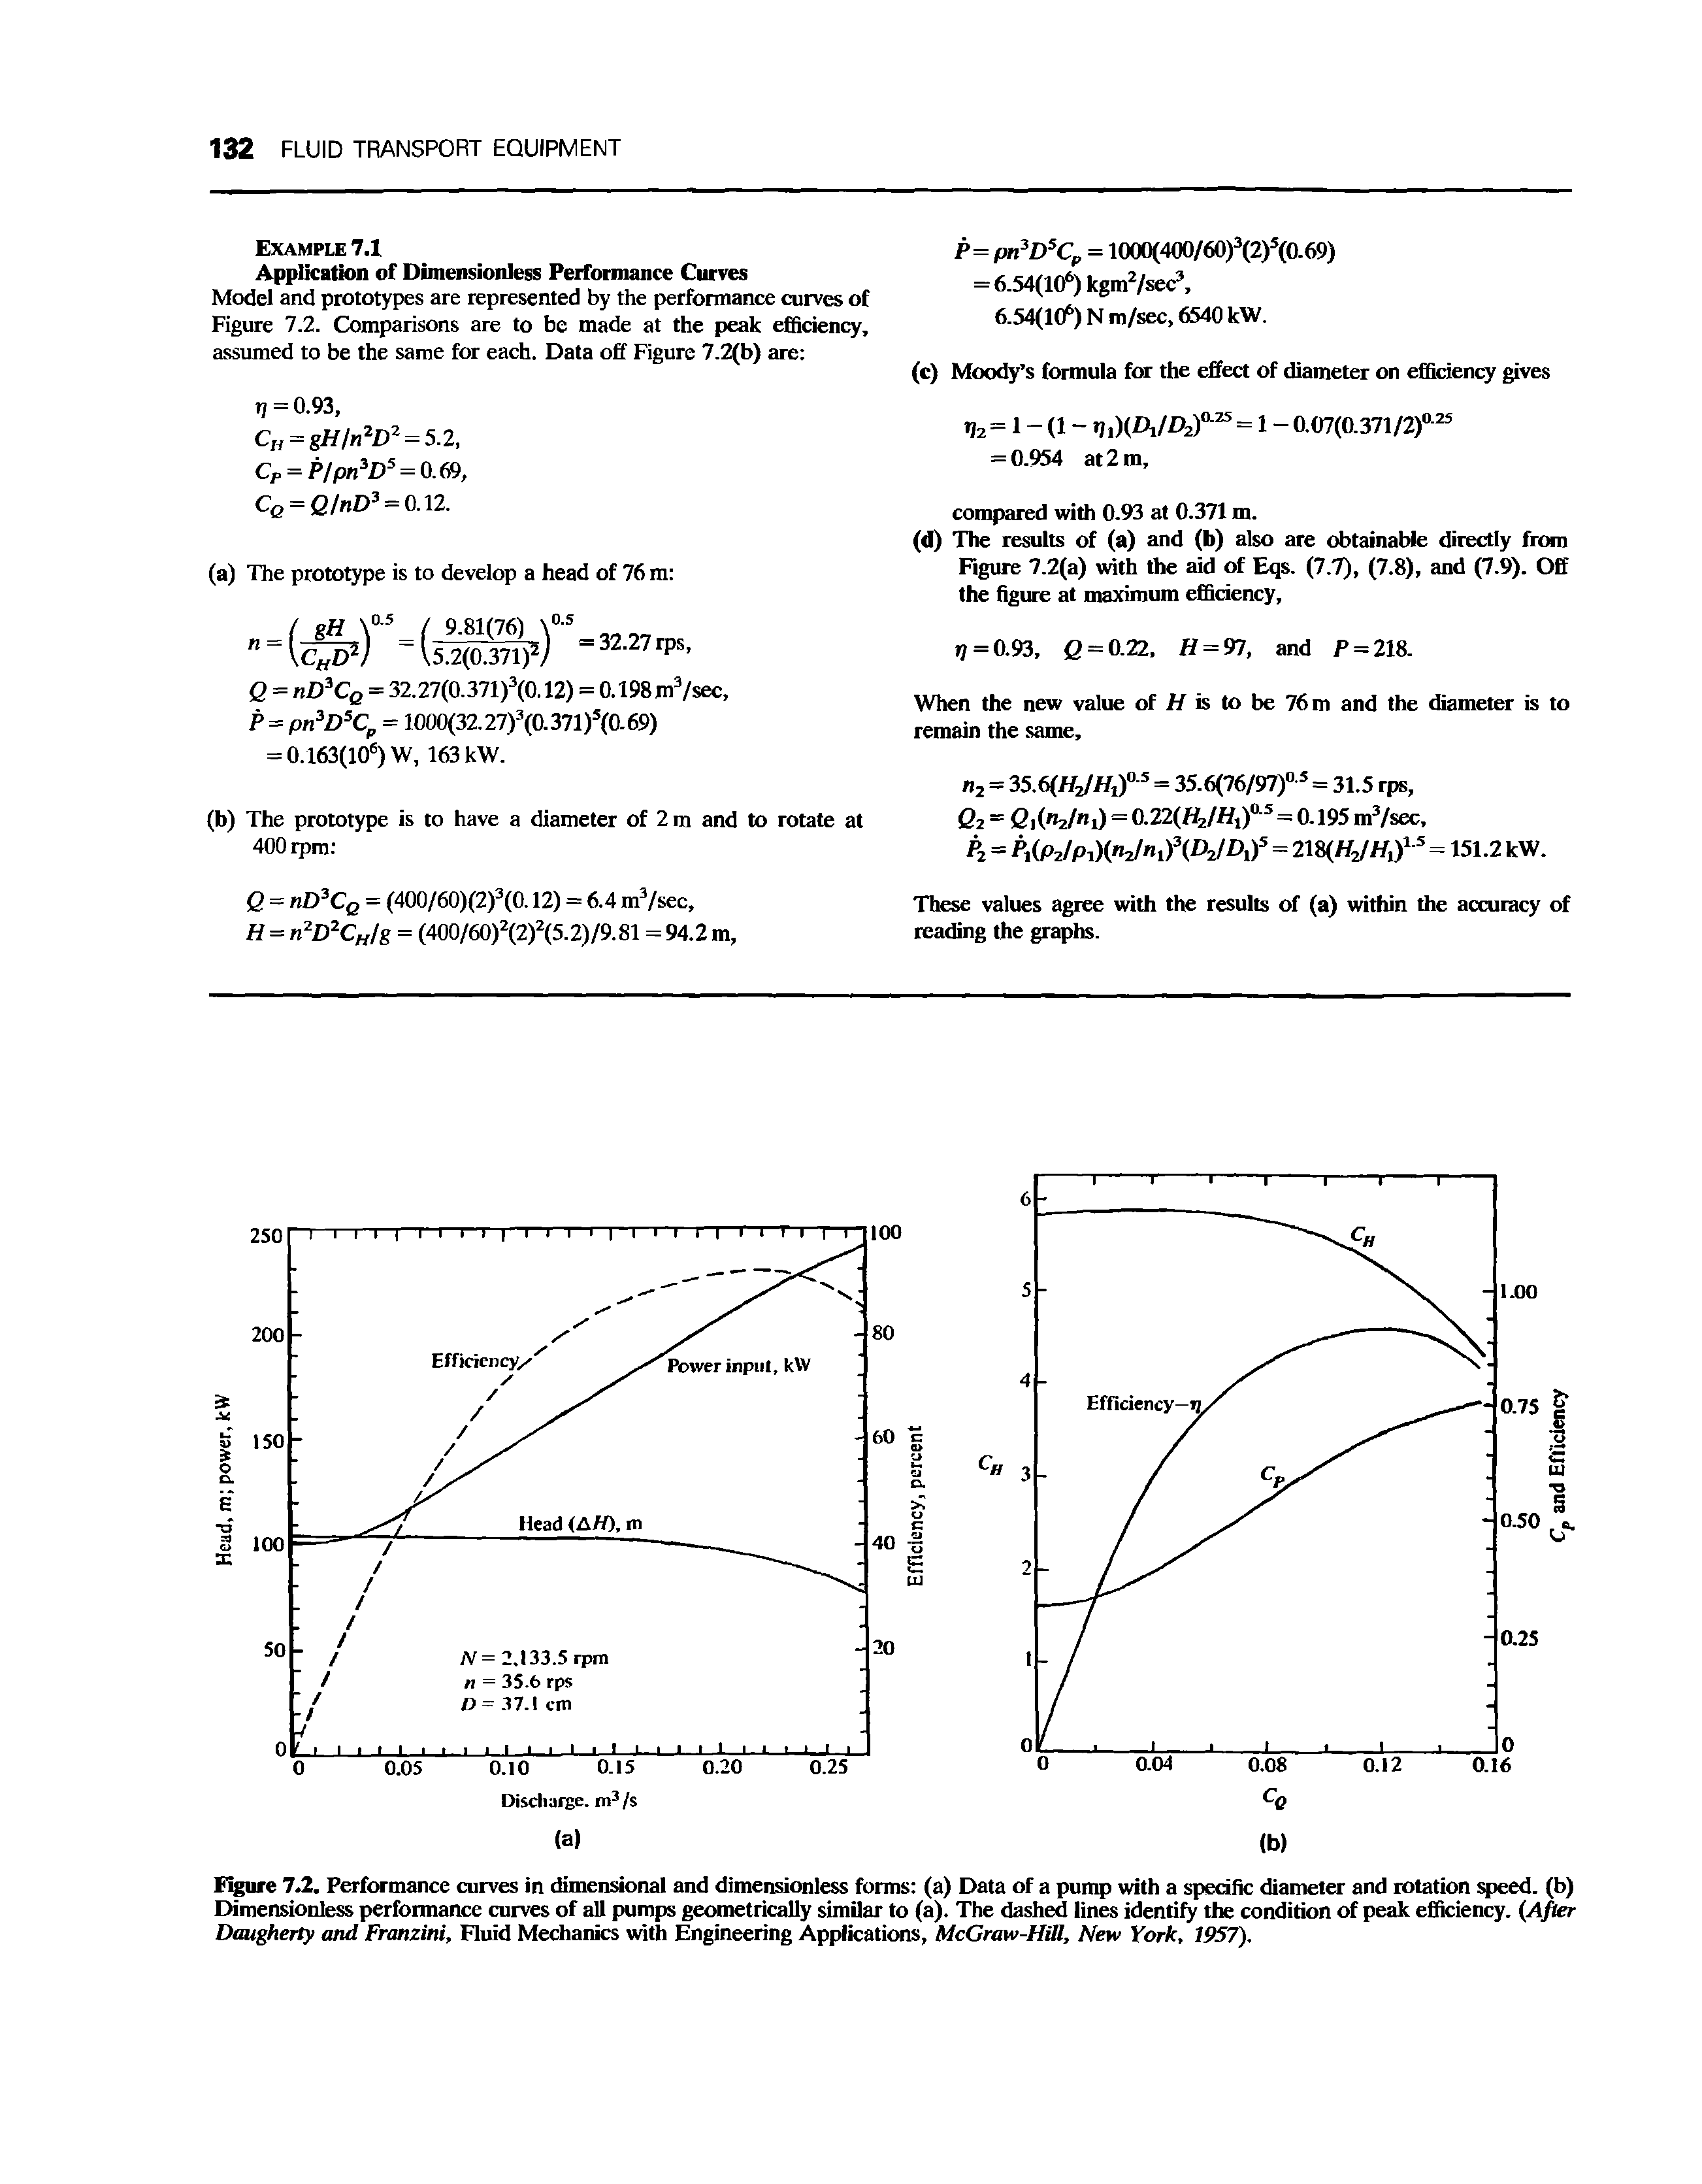 Figure 7.2. Performance curves in dimensional and dimensionless forms (a) Data of a pump with a specific diameter and rotation speed, (b) Dimensionless performance curves of all pumps geometrically similar to (a). The dashed lines identify the condition of peak efficiency. (After Daugherty and Franzini, Fluid Mechanics with Engineering Applications, McGraw-Hill, New York, 1957).